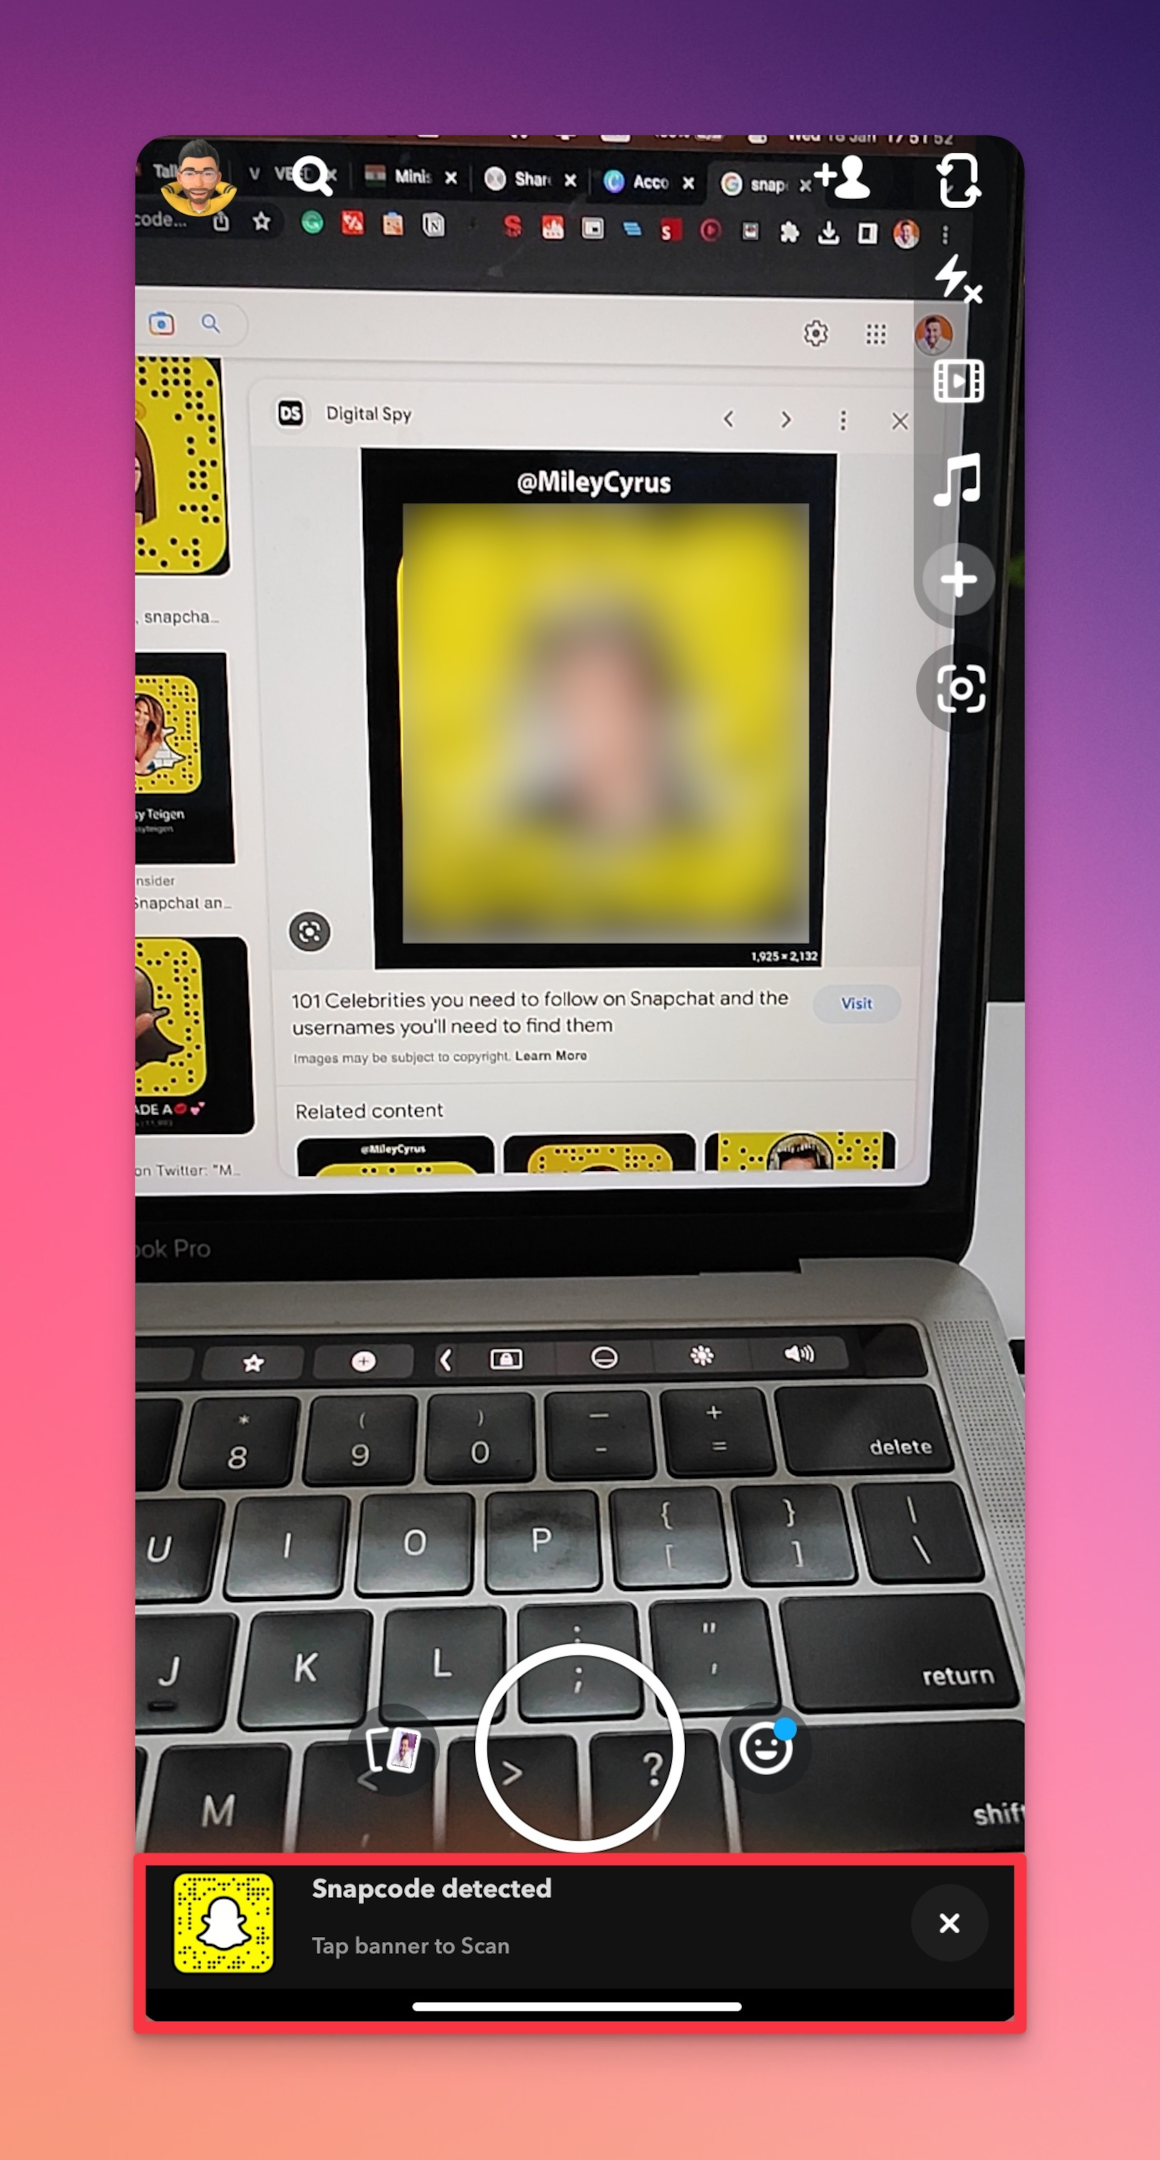 Remote.tools shows to add new friend by pointing the snapchat camera in the app to scan a snap code. These users are not from your contacts. They will get a notification of your friend request